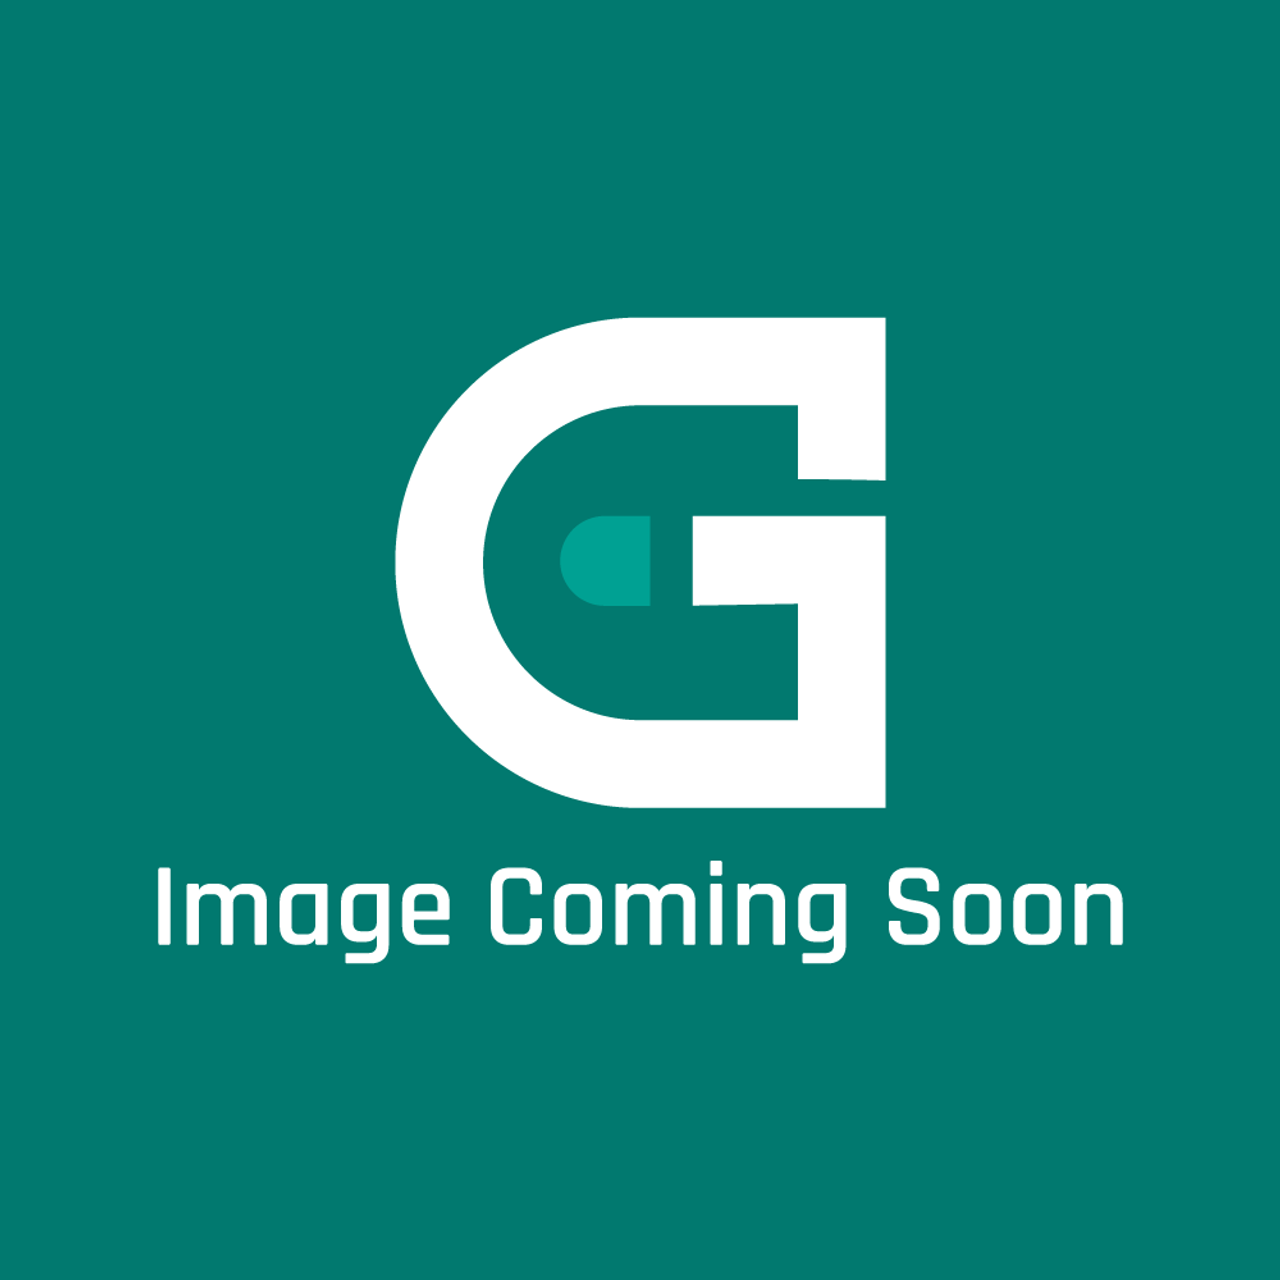 GE Appliances WR87X29131 - Condenser - Image Coming Soon!